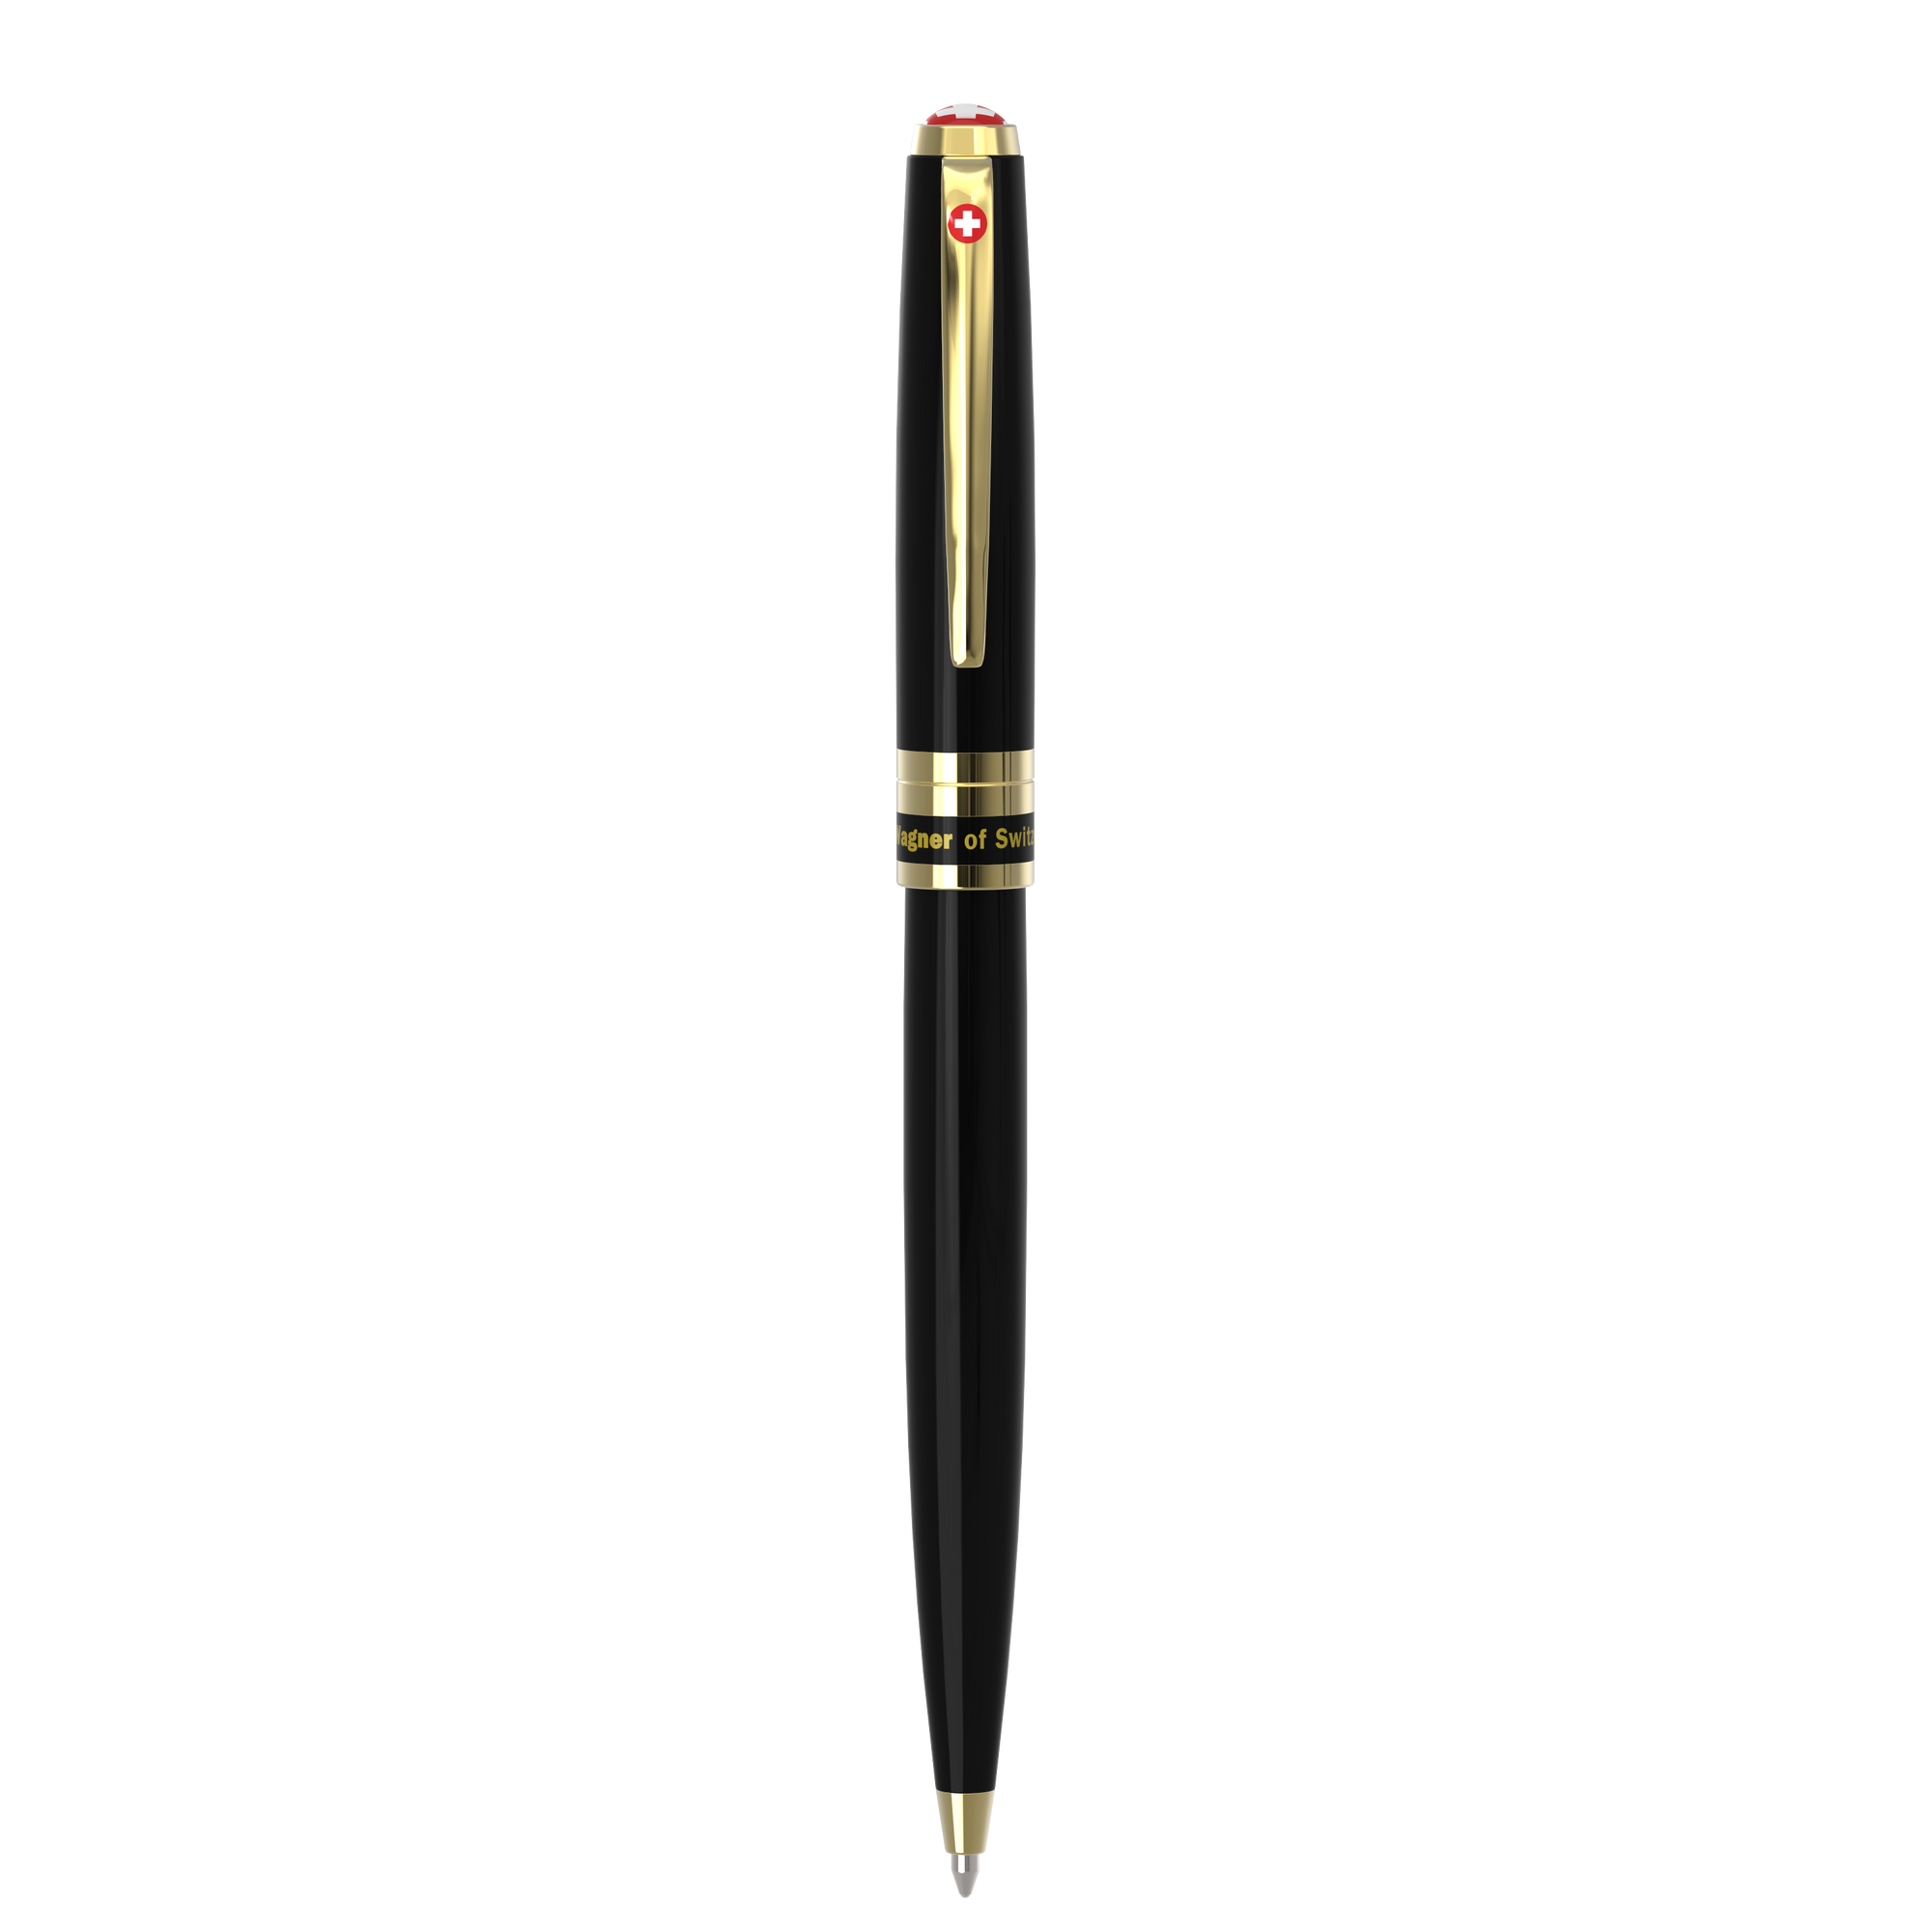 SWISS PEN ELEGANCE, black with 14 carat gold accents